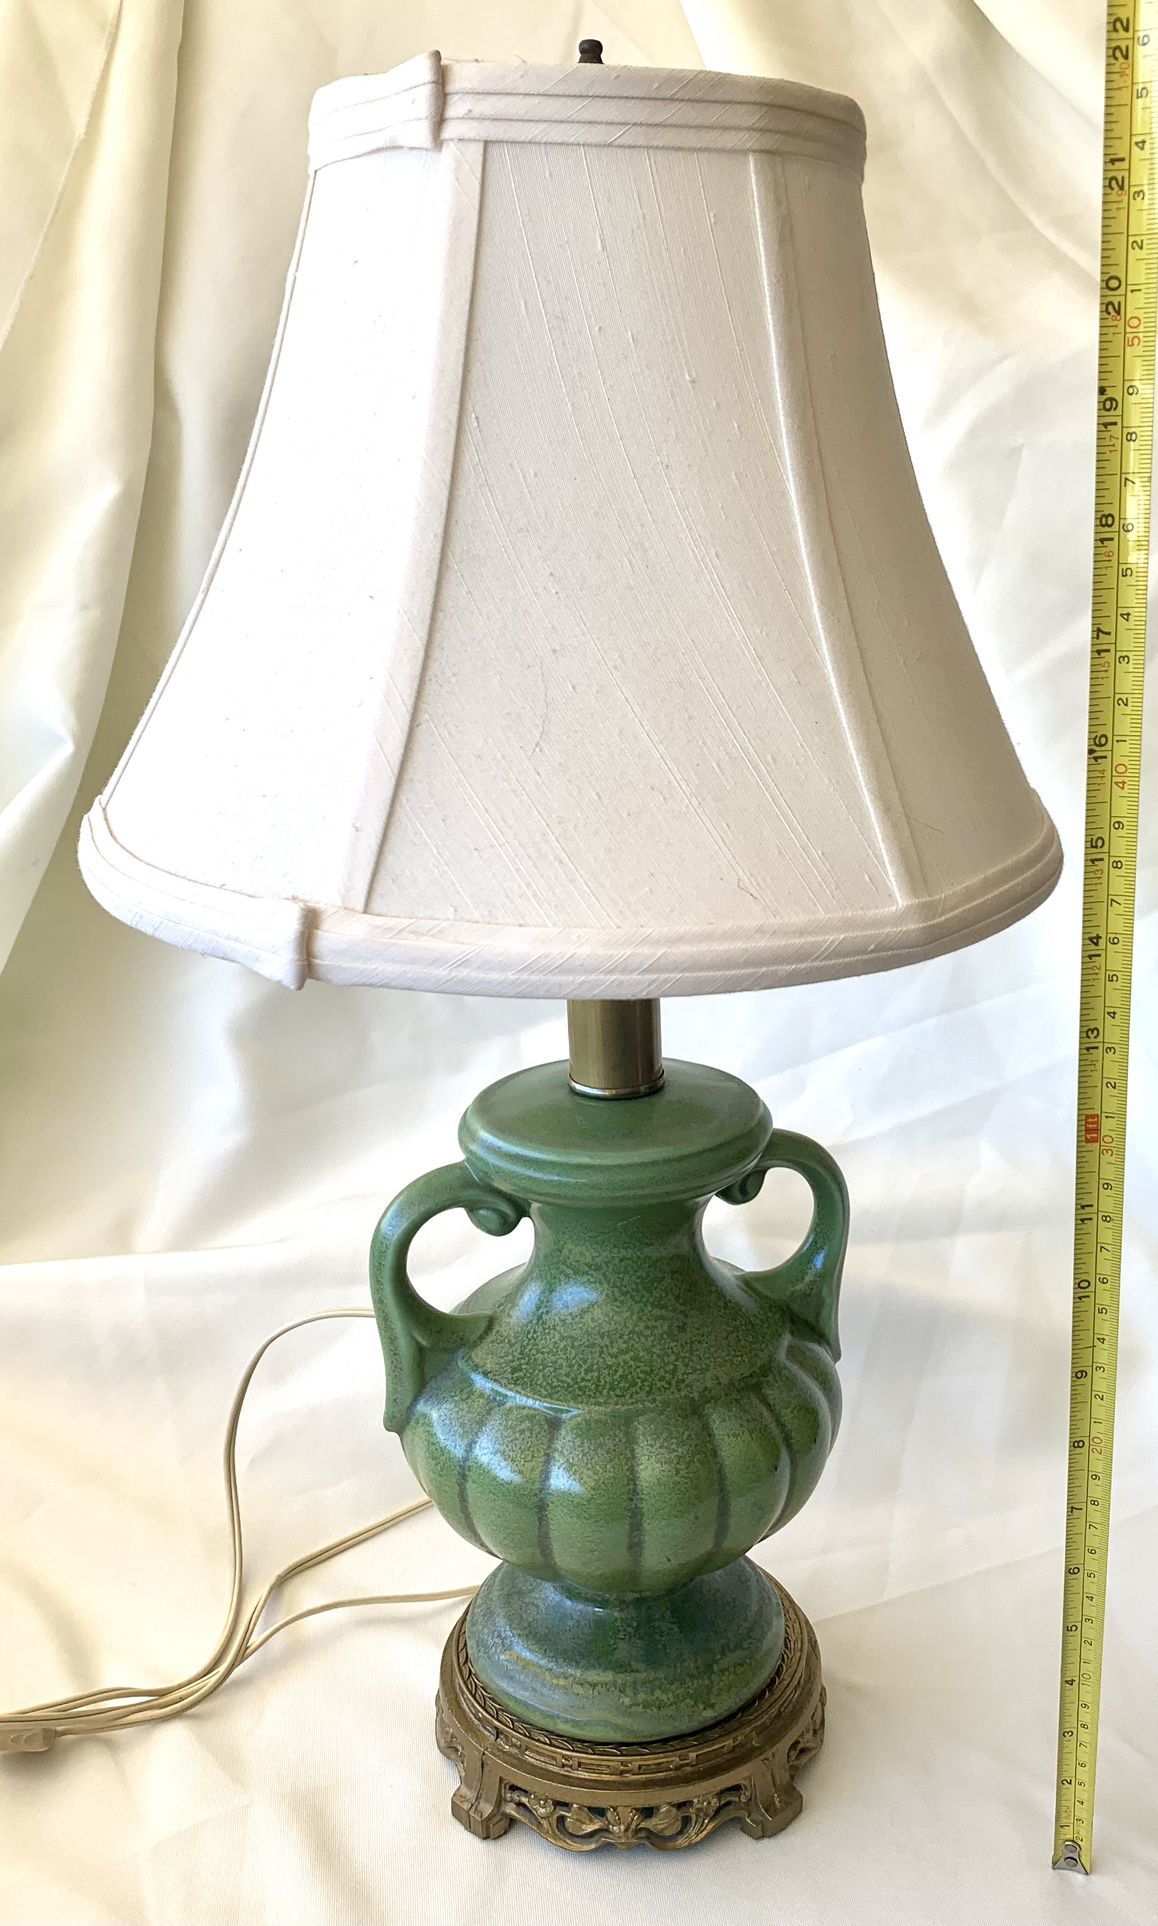 Antique Ceramic Table Lamp Brass Base With Shade Works Great!